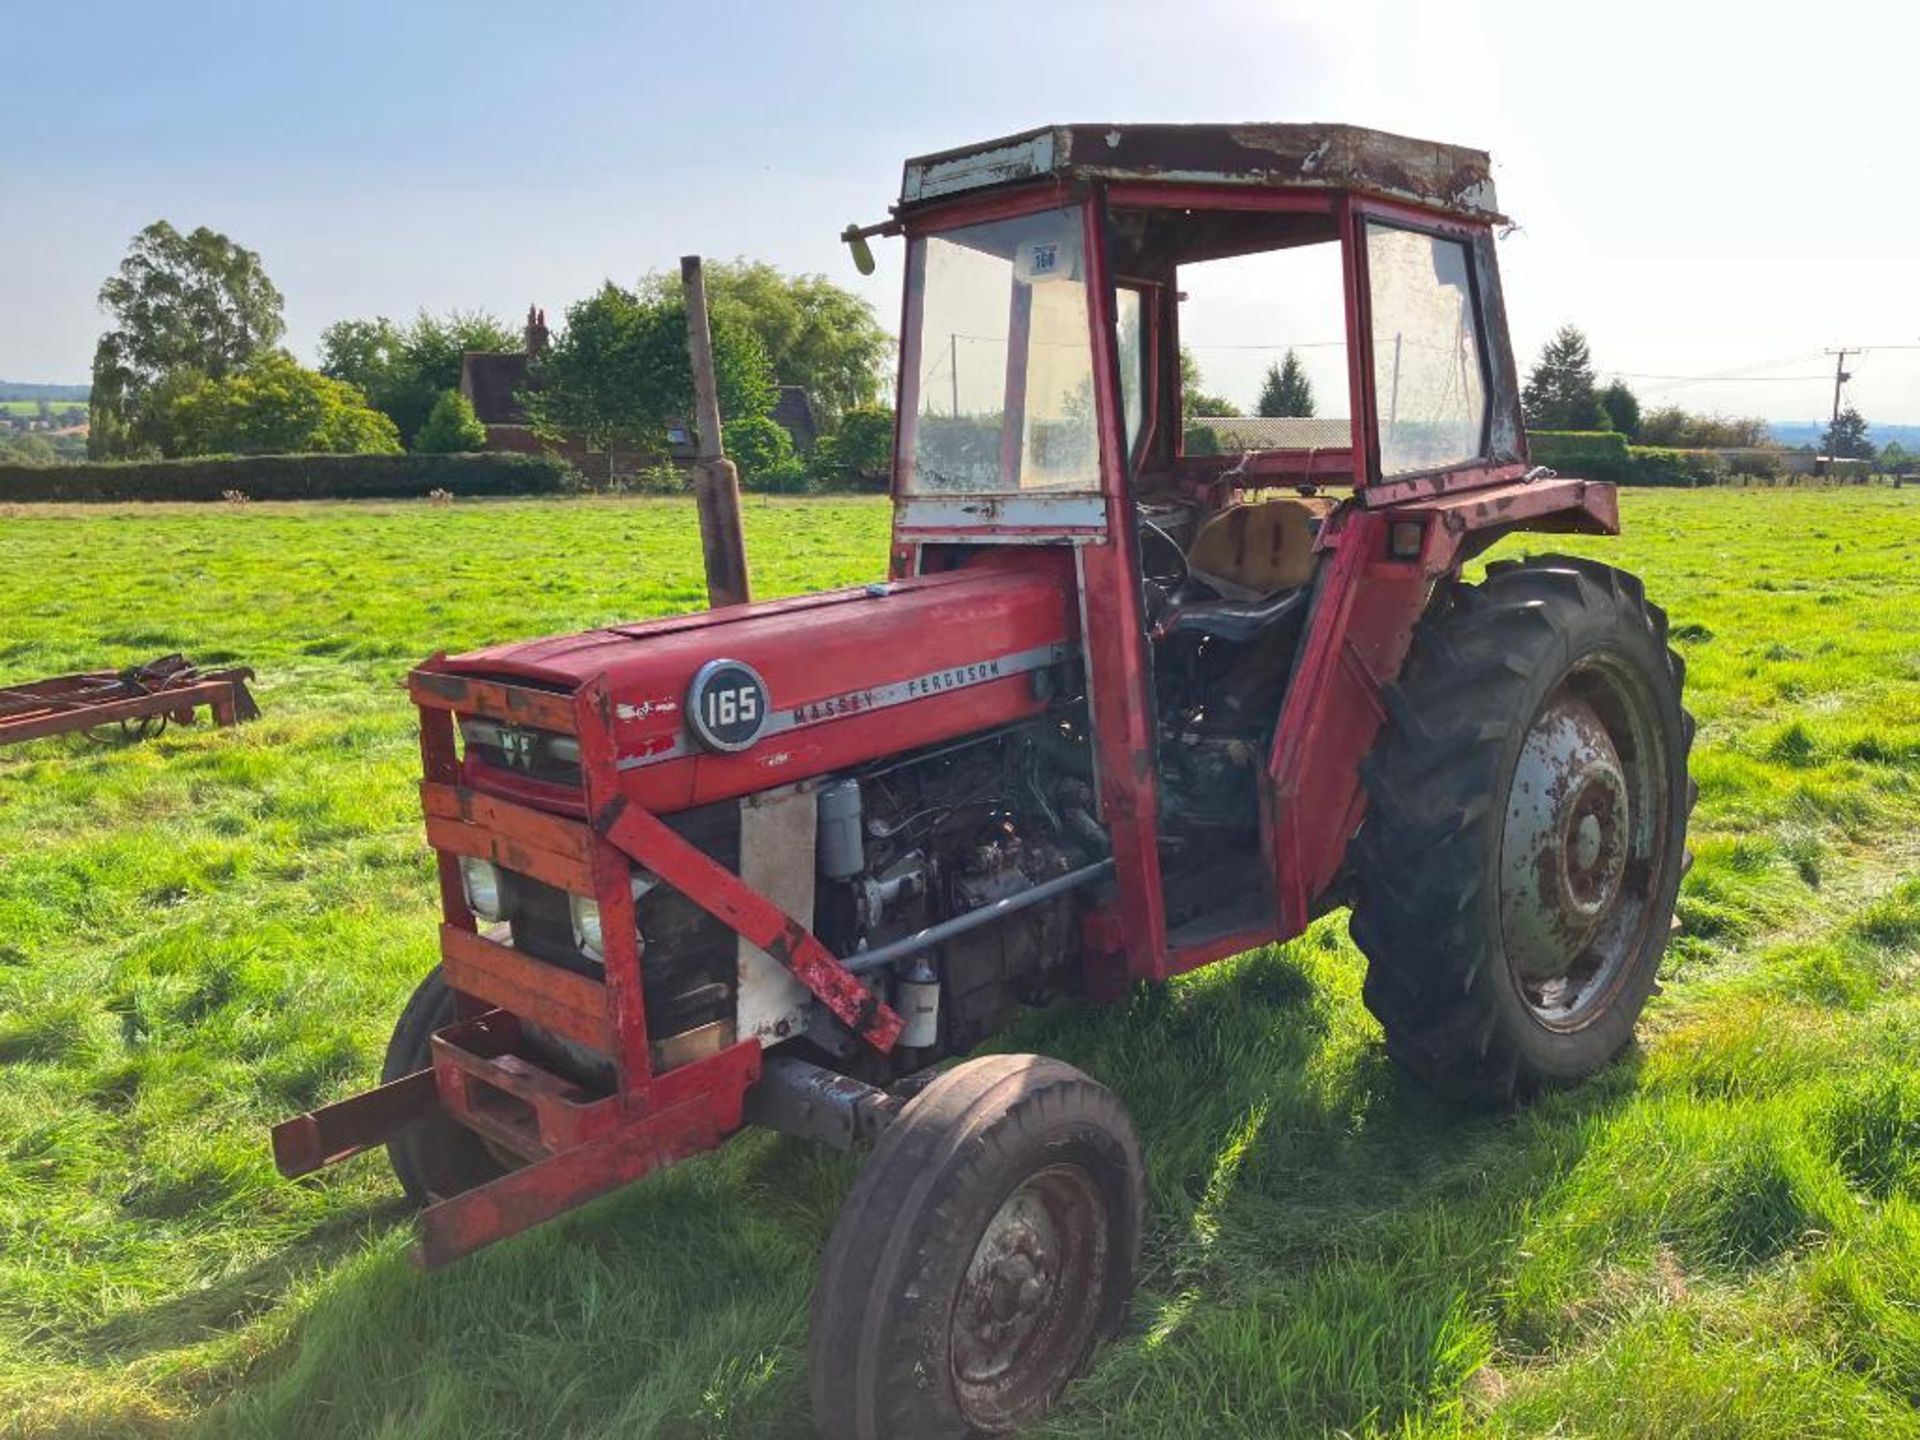 1978 Massey Ferguson 165 Multipower 2wd diesel tractor with Sirocco cab on 7.5-16 front and 12.4/11- - Image 4 of 7